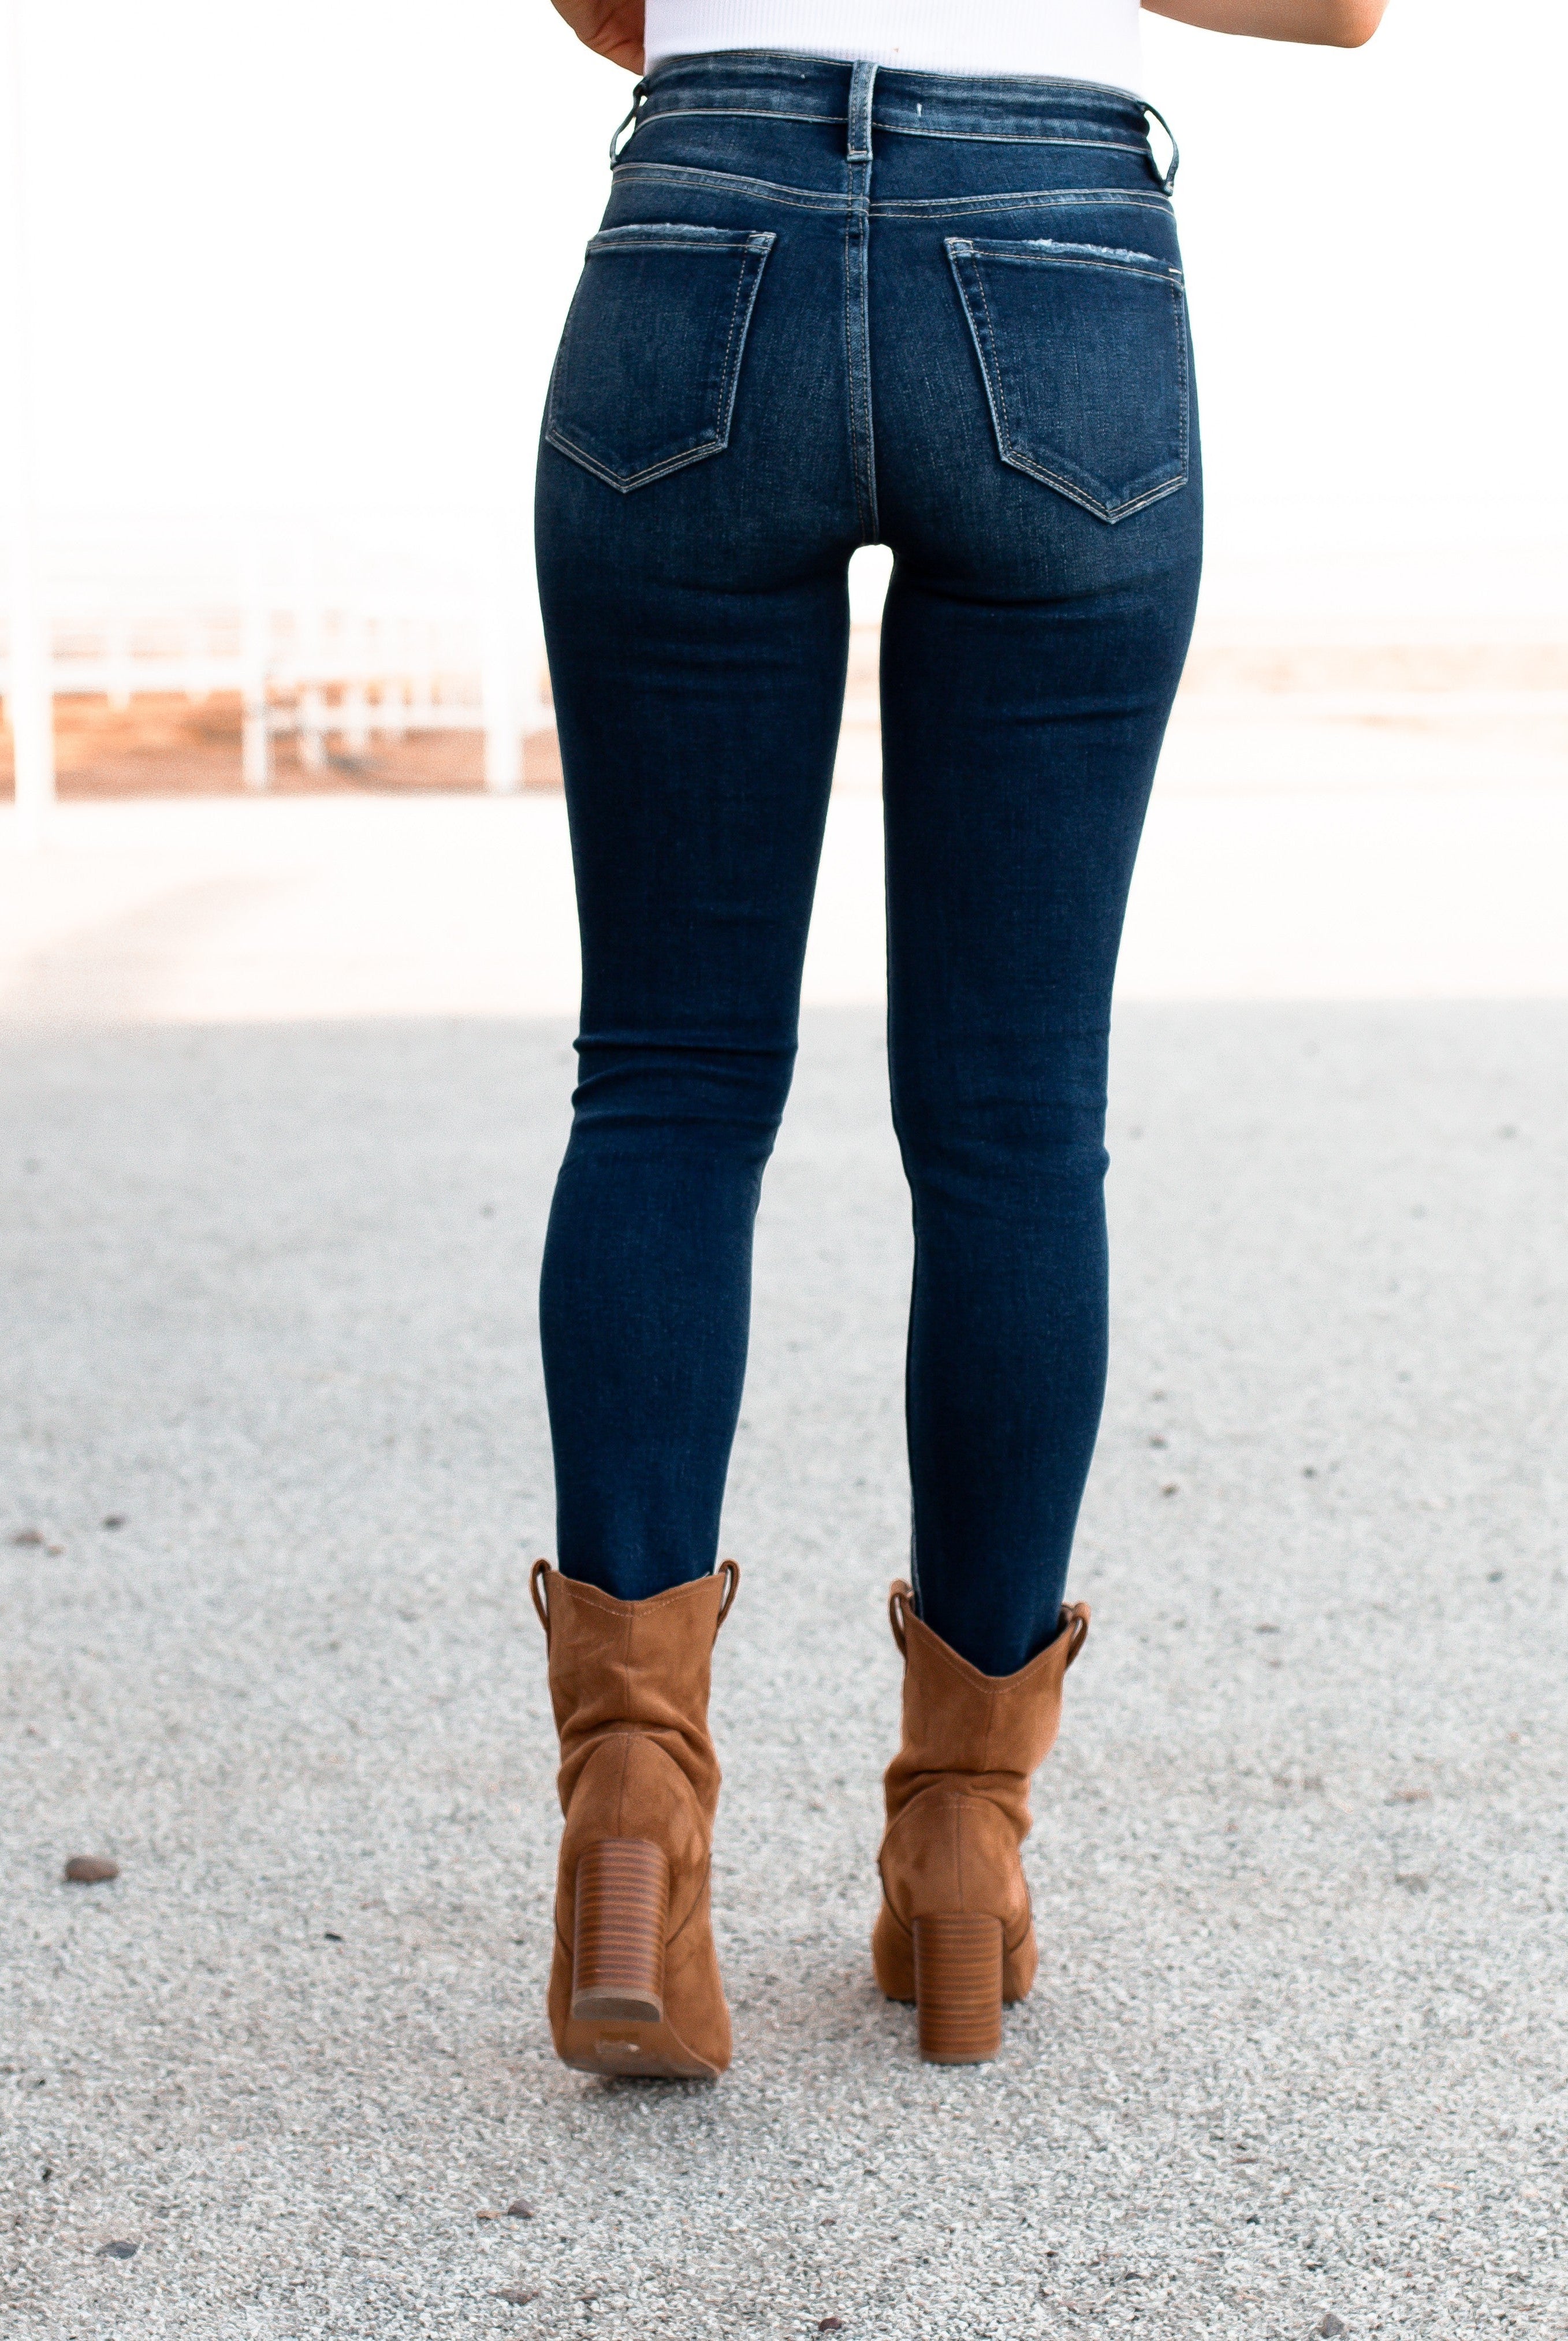 Fit Like a Glove Perfect Fall Denim-Jeans-Krush Kandy, Women's Online Fashion Boutique Located in Phoenix, Arizona (Scottsdale Area)